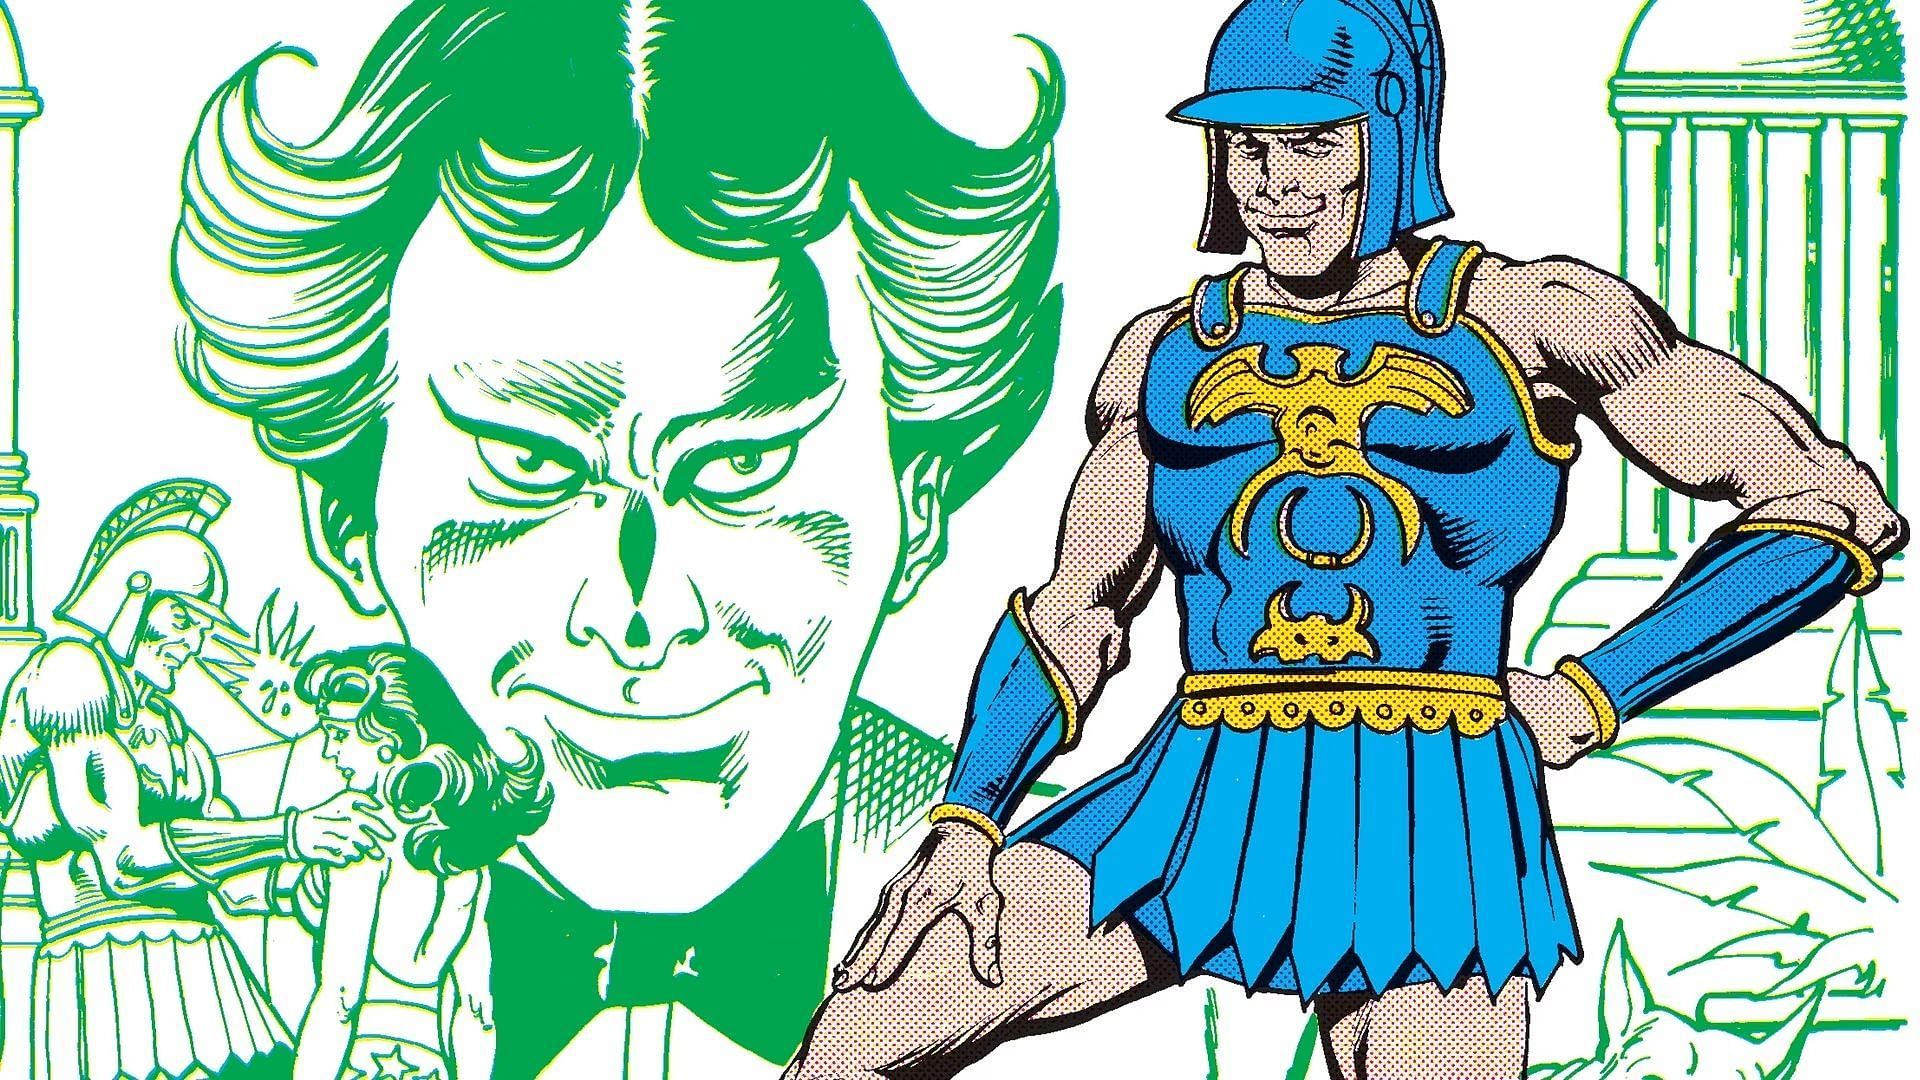 The Duke of Deception is a classic and iconic Wonder Woman villain. (Image via DC)